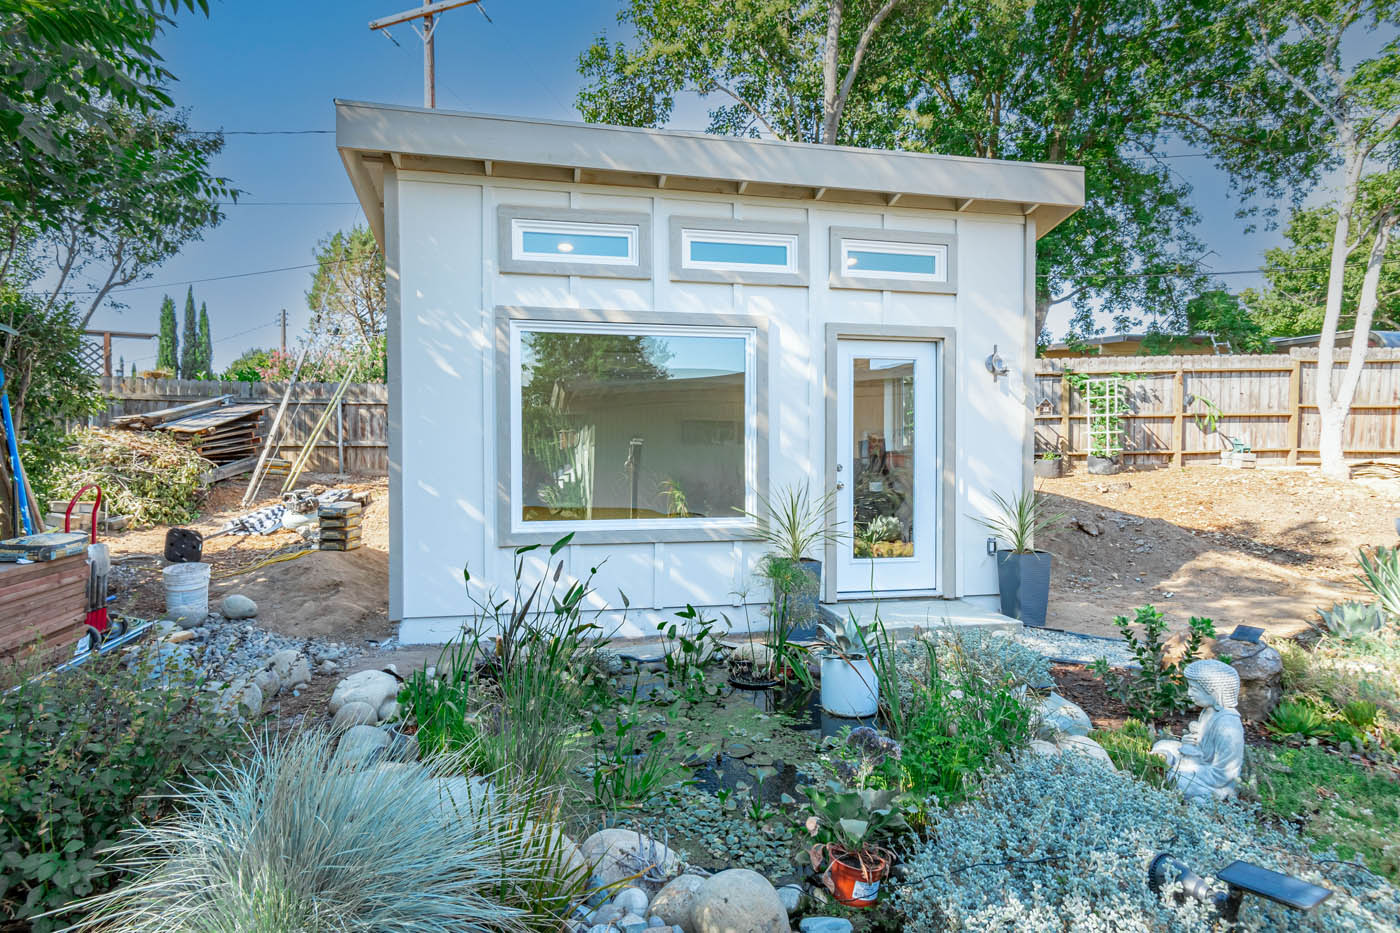 A Houston detached ADU in a California backyard by a pool, learn more about our best tiny home builder in Houston.